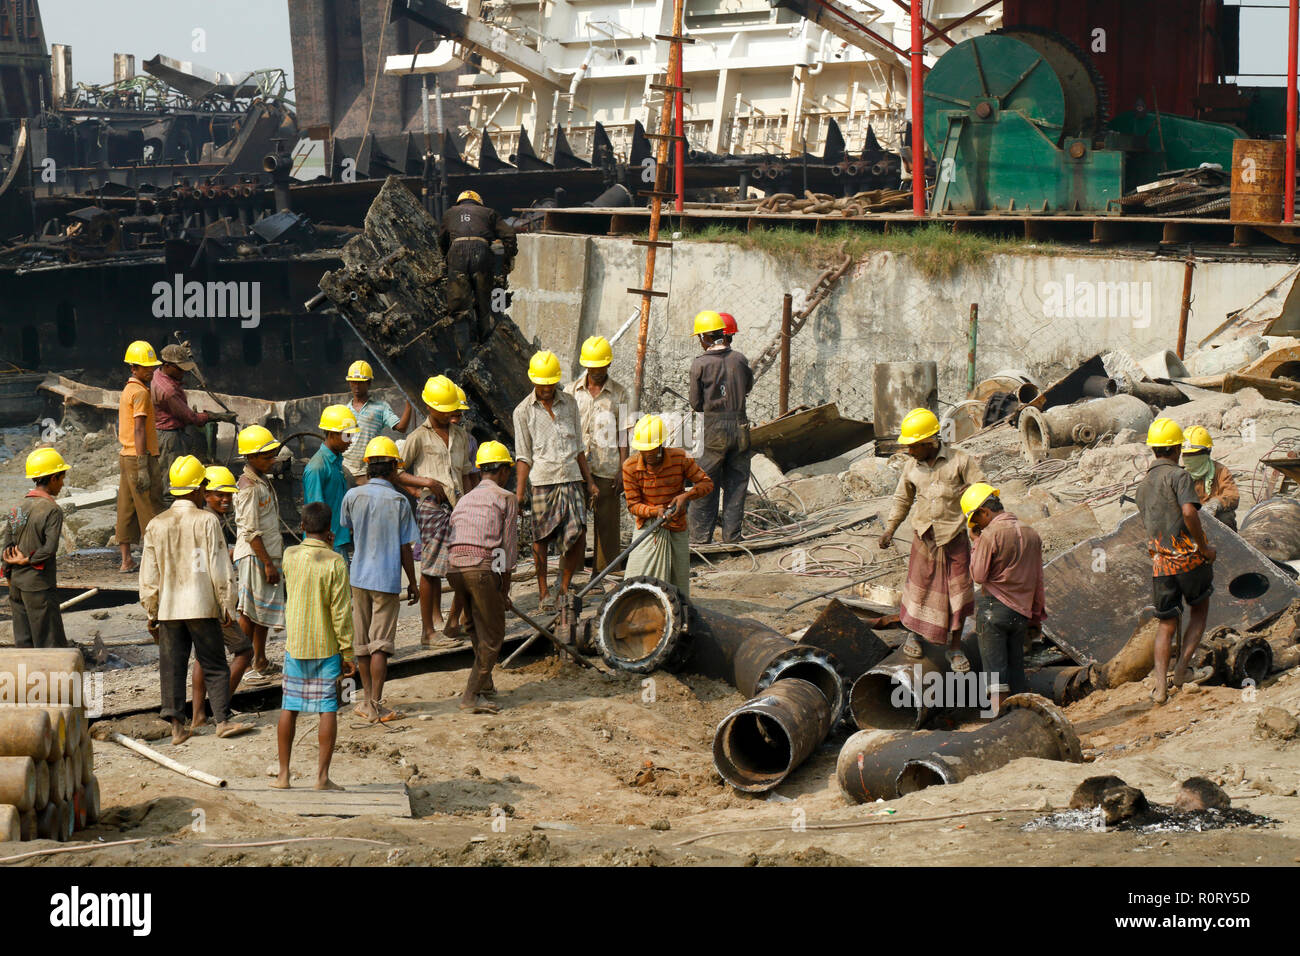 Labourers  work at ship- breaking yard. Bangladesh is dependent on ship-breaking industry for 80% of its steel needs. Chittagong, Bangladesh. Stock Photo